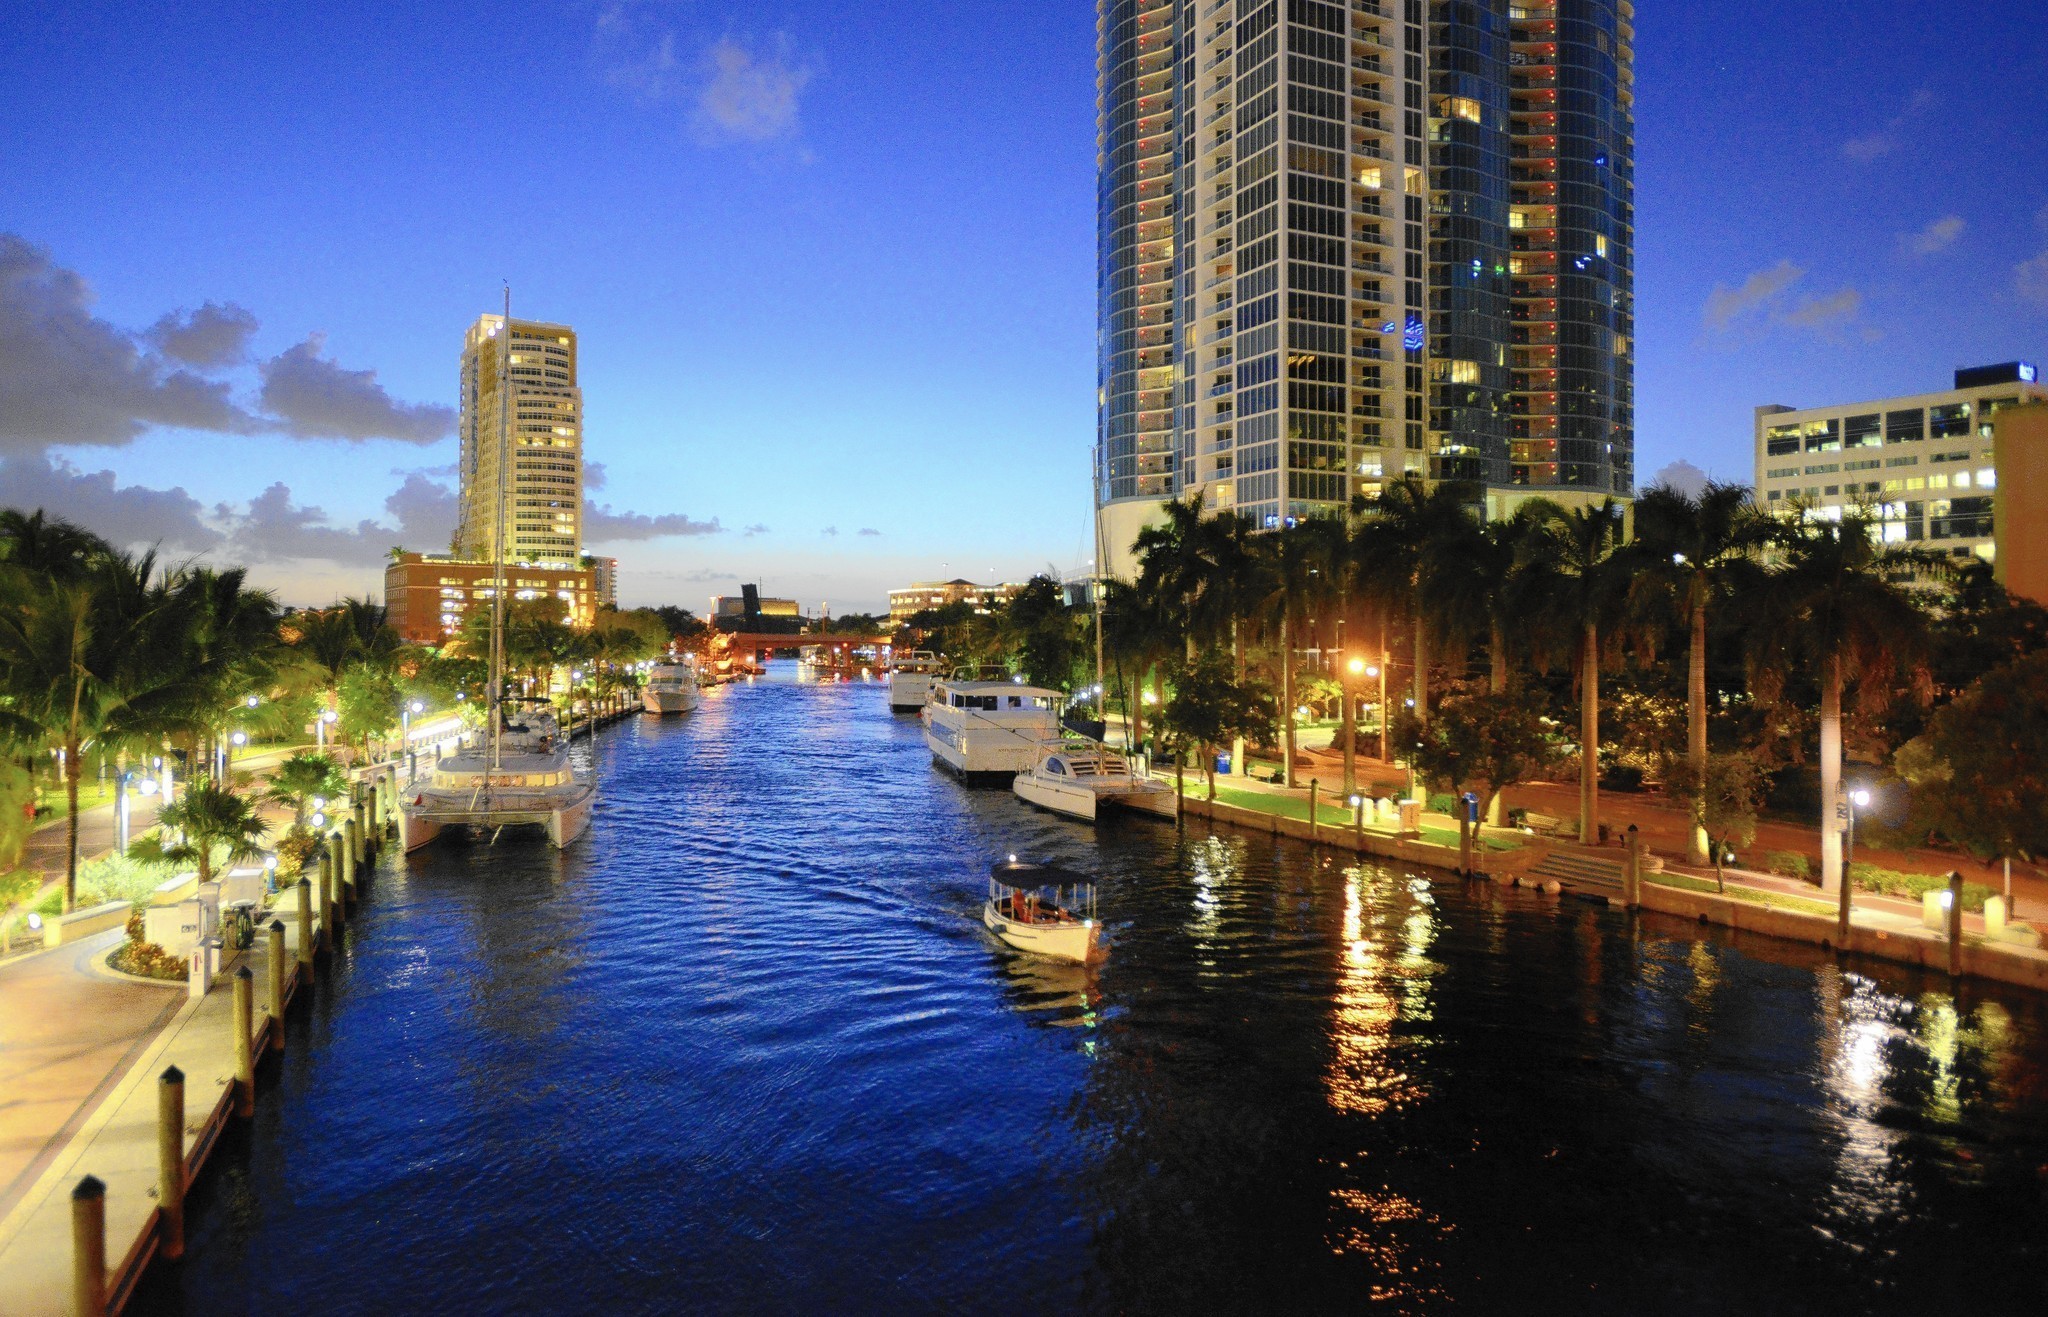 Riverbank In Ft Lauderdale Free Water Trolley Could Connect Downtown Fort L...